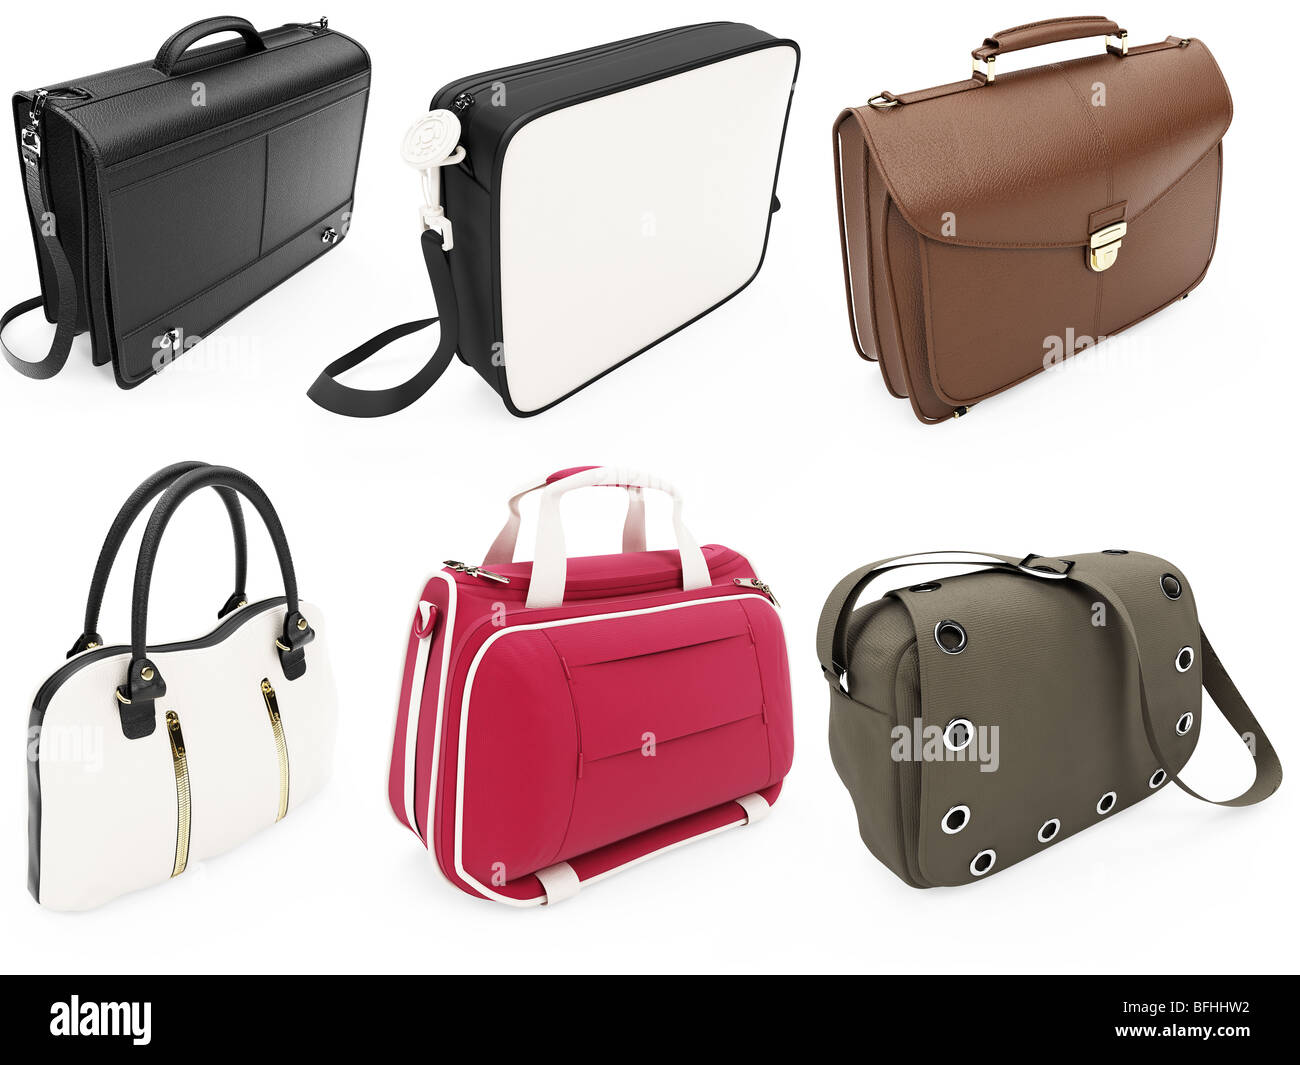 Isolated collection of handbags over white background Stock Photo - Alamy